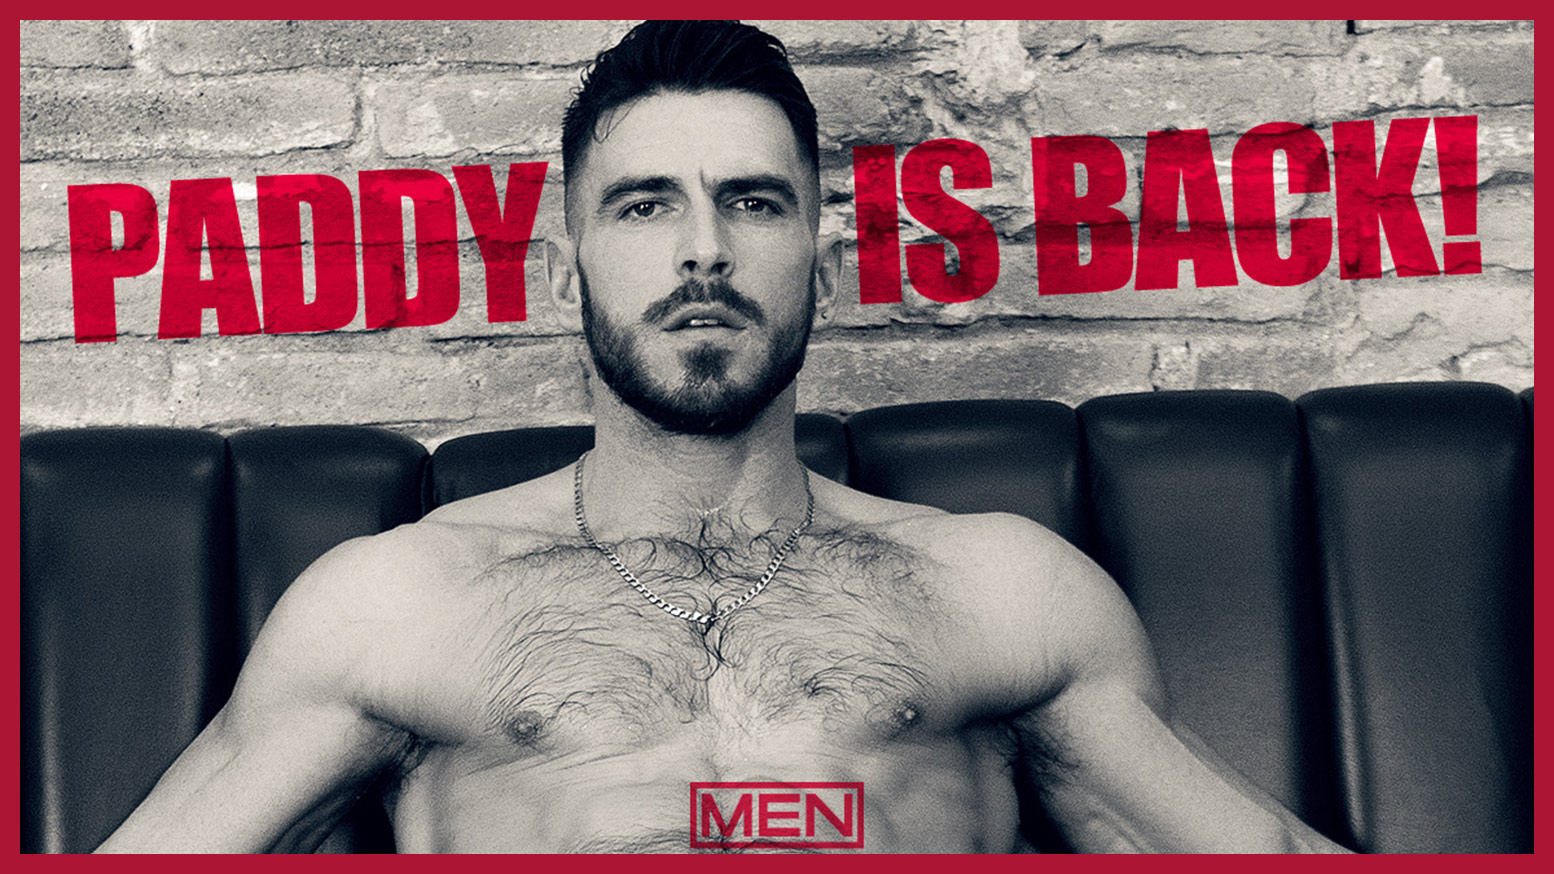 Coming Soon To MEN.com: Paddy O'Brien Is Back!